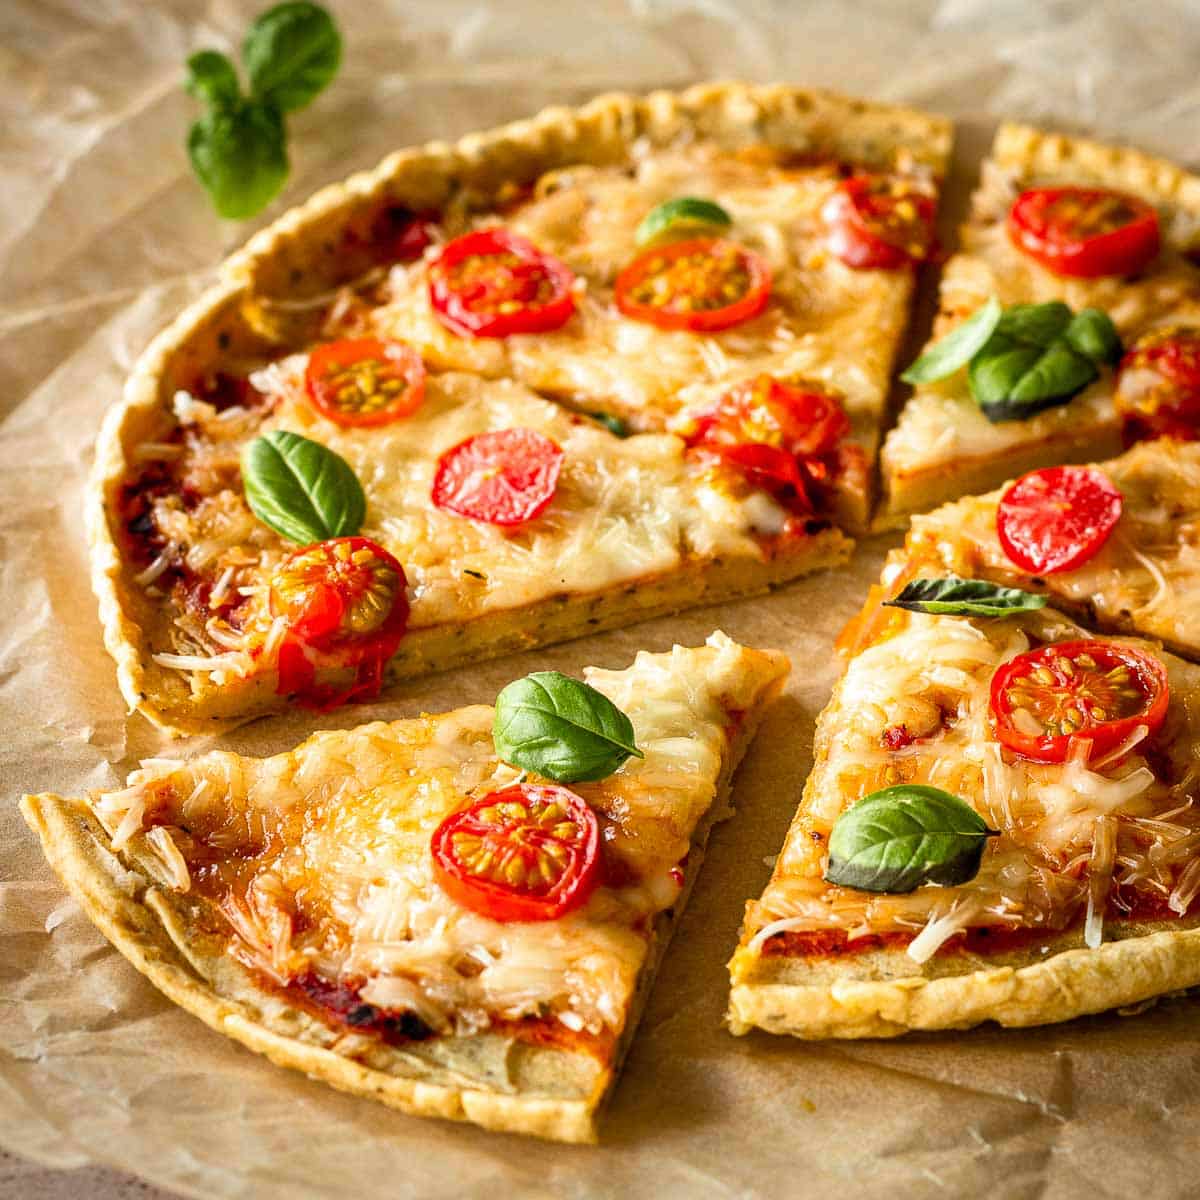 Chickpea flour pizza crust topped with vegan cheese, cherry tomatoes and basil leaves.